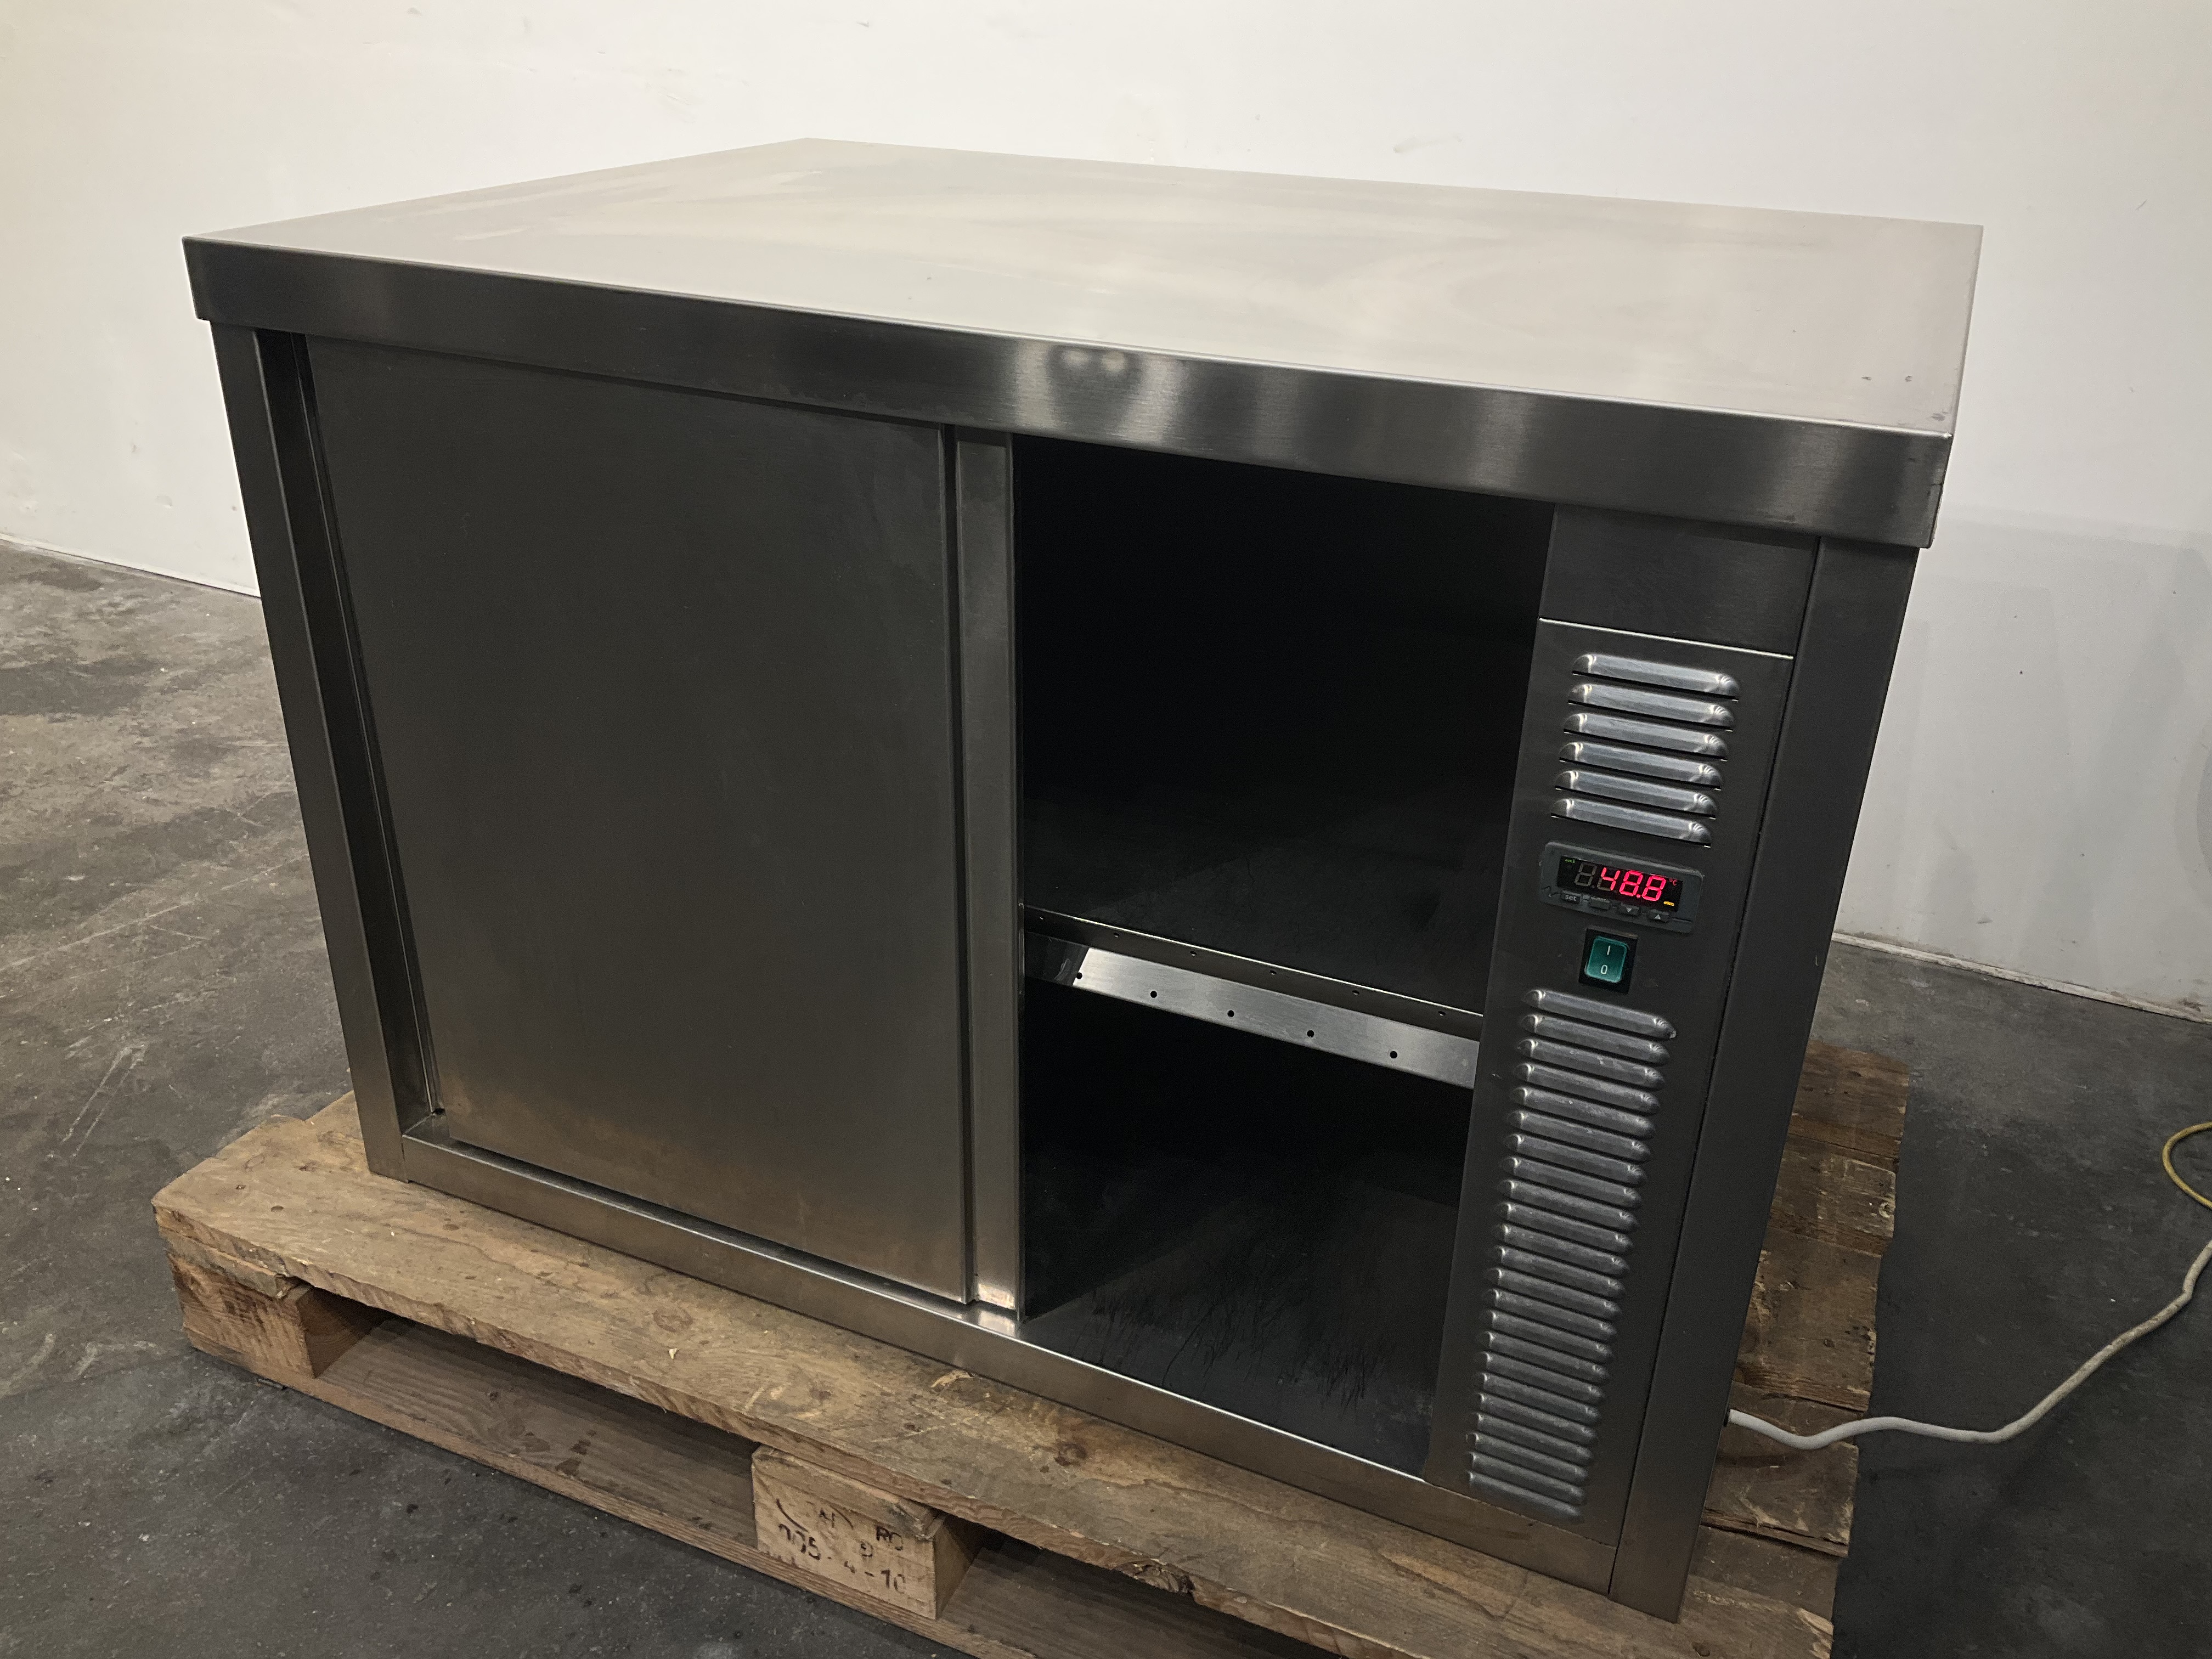 Plate warmer / stainless steel cabinet, used